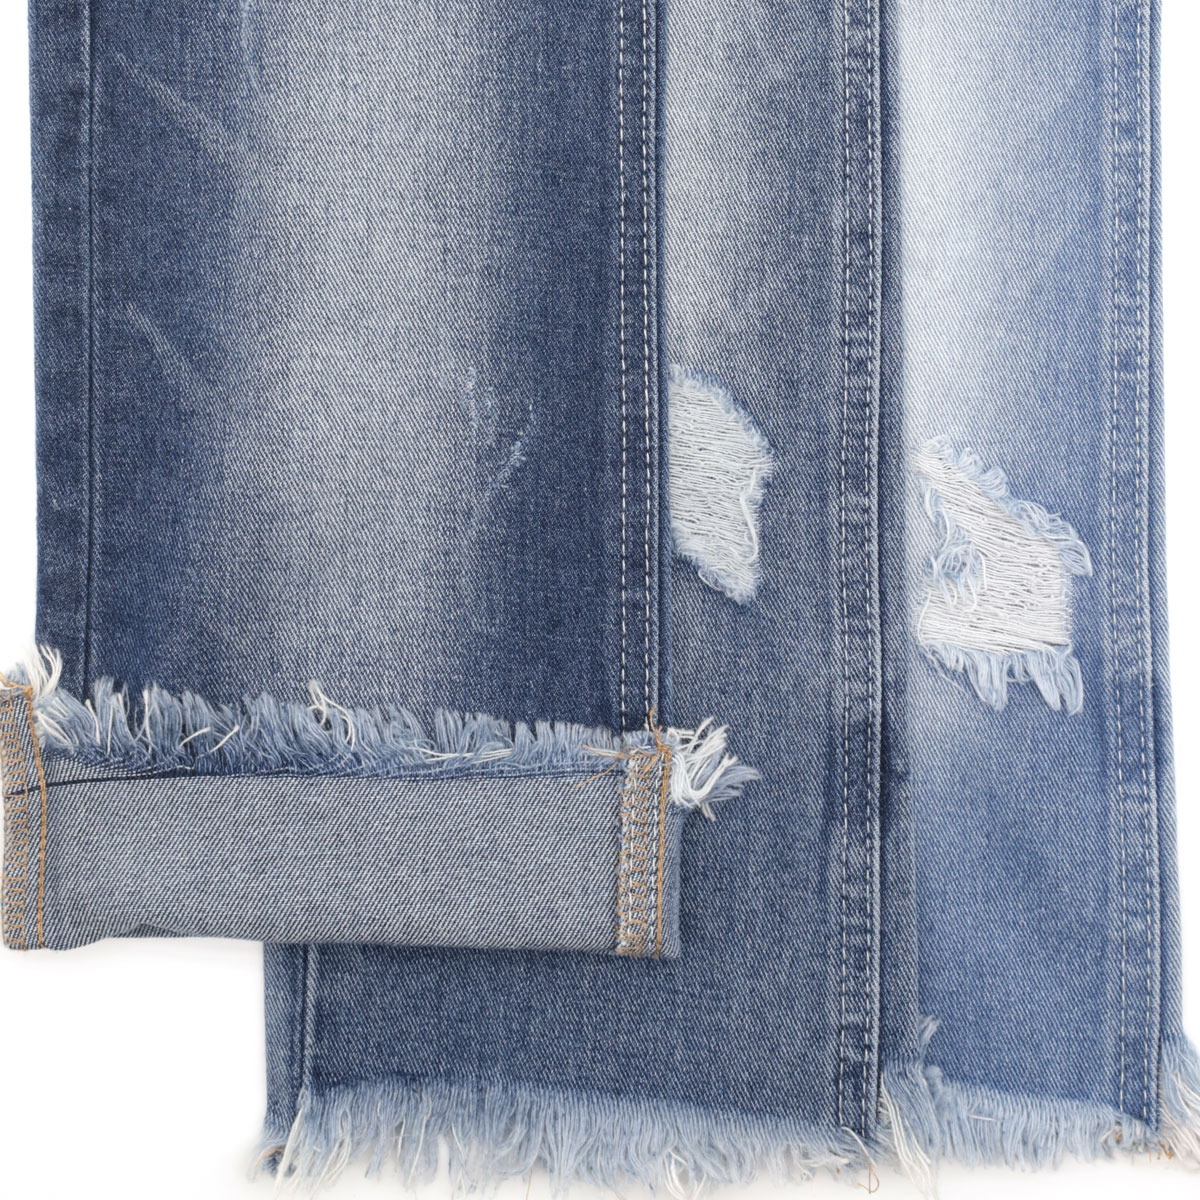 How to Sew Your Own Soft Denim Fabric From Old Jeans 1